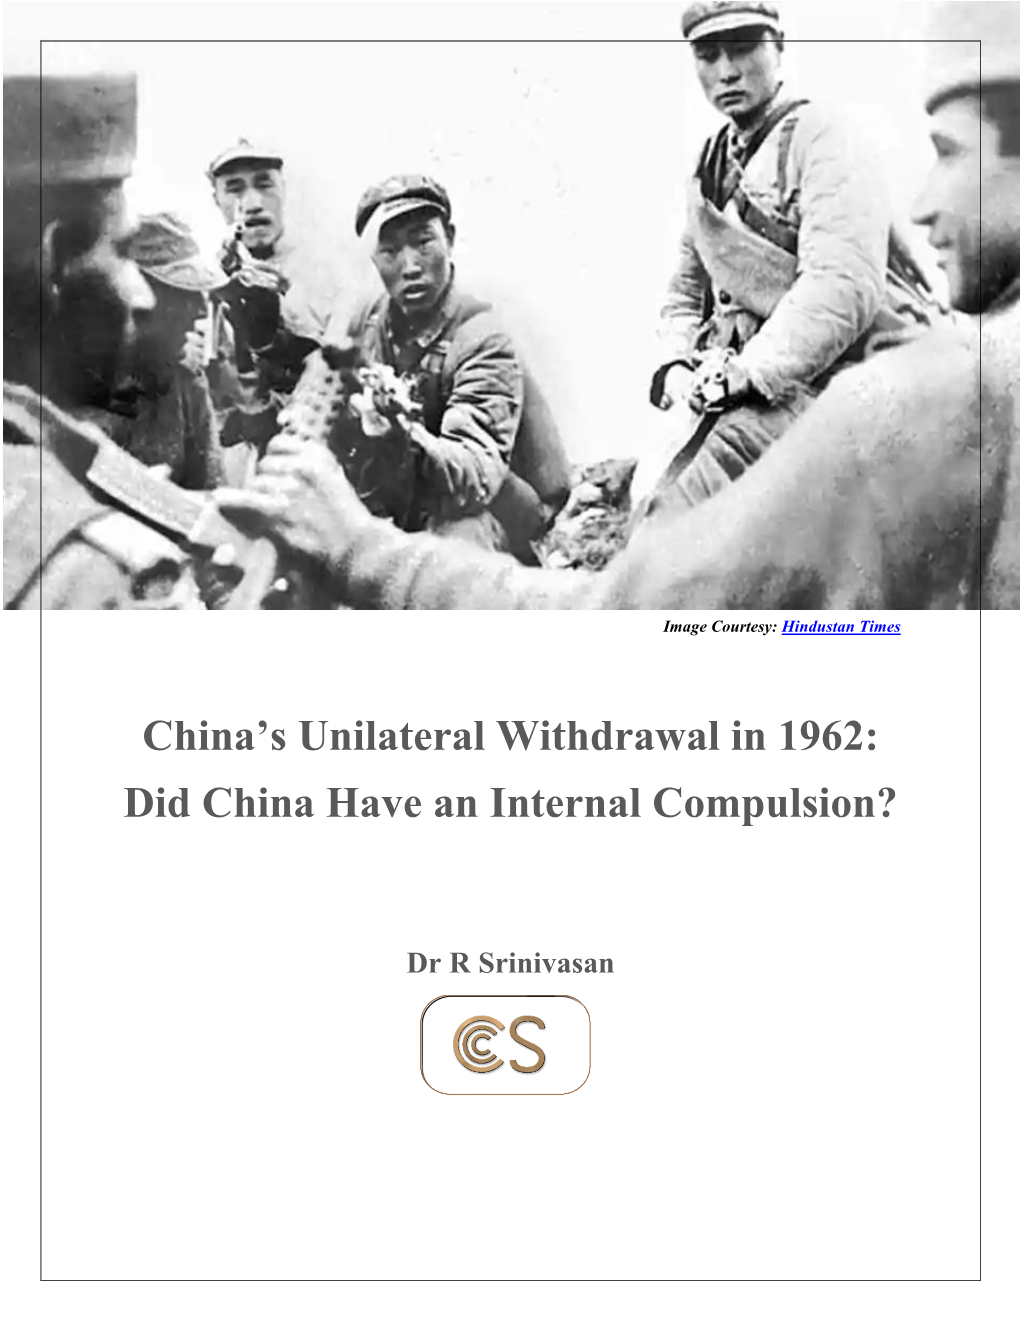 China's Unilateral Withdrawal in 1962: Did China Have an Internal